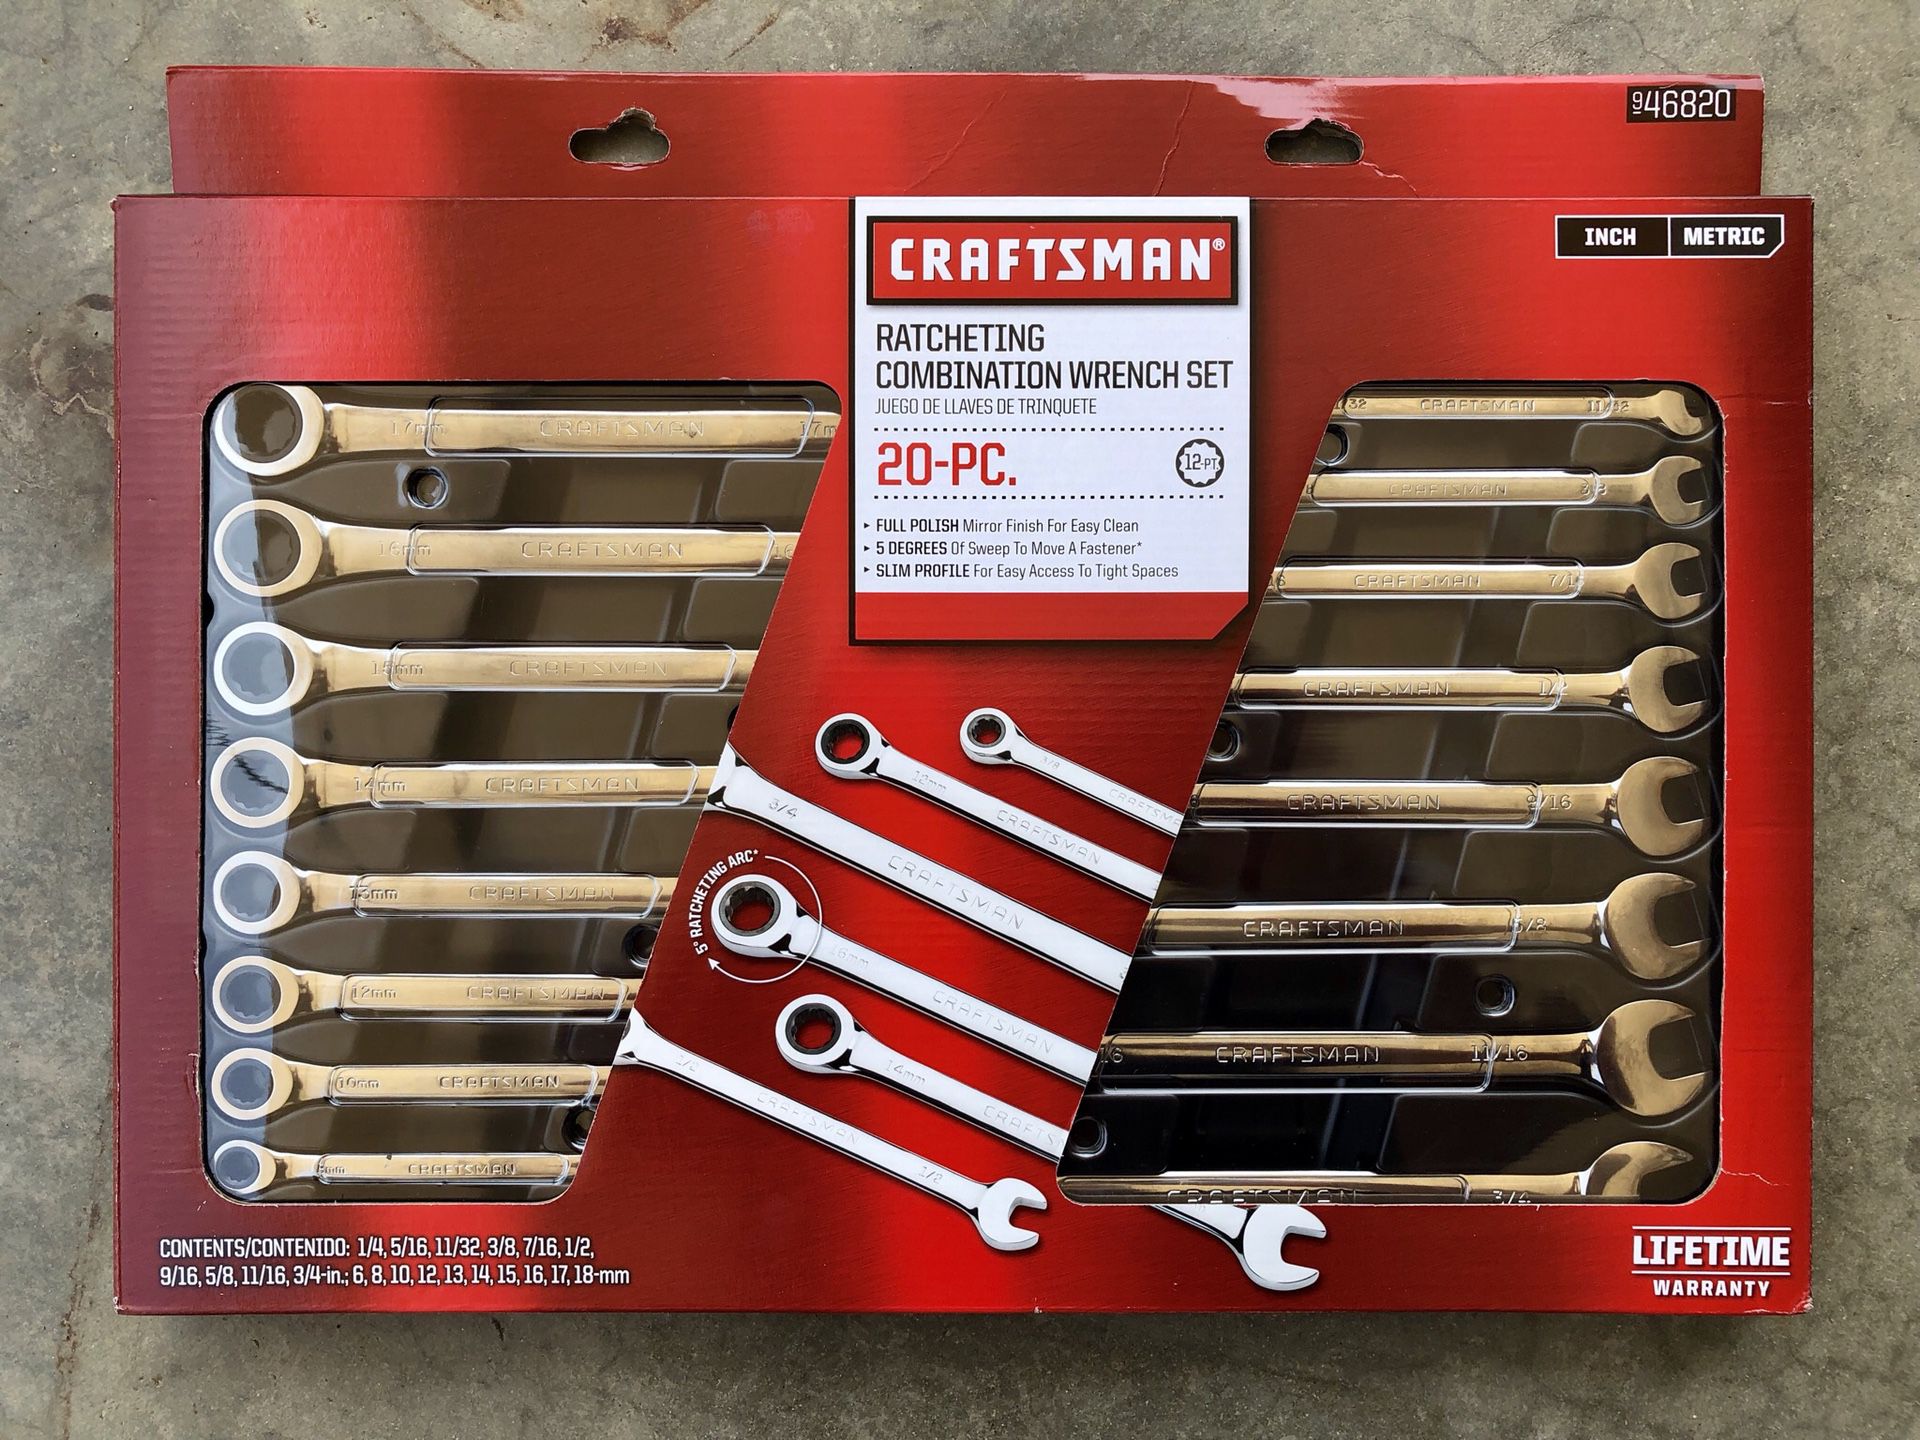 Craftsman 20 Piece Ratcheting Combination Wrench Set New for Sale in Santa  Ana, CA OfferUp